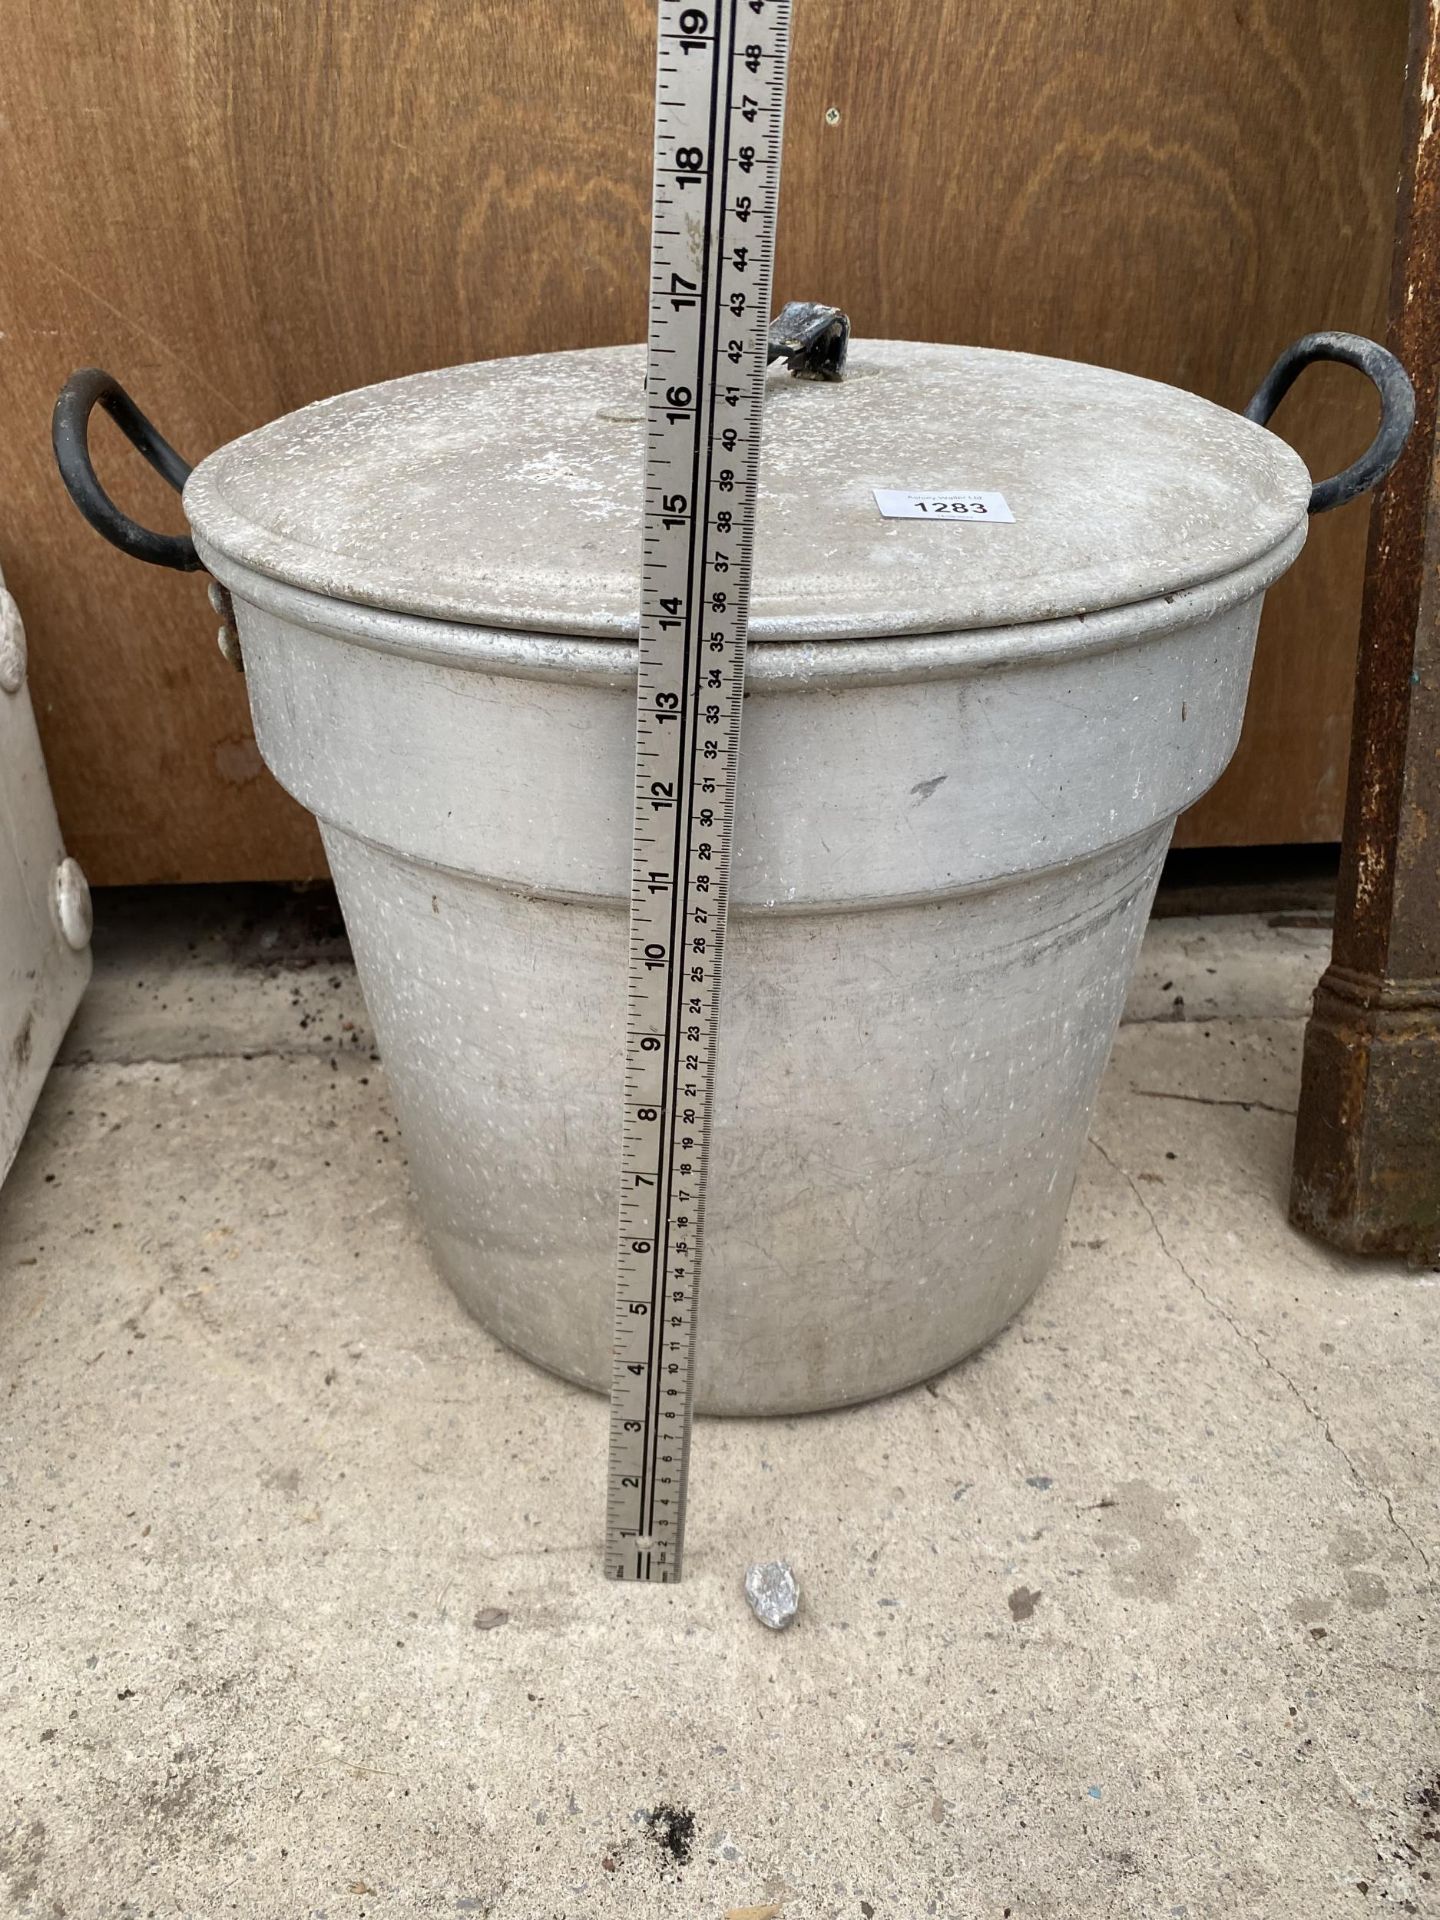 A LARGE ALUMINIUM COOKING POT WITH LID - Image 2 of 3